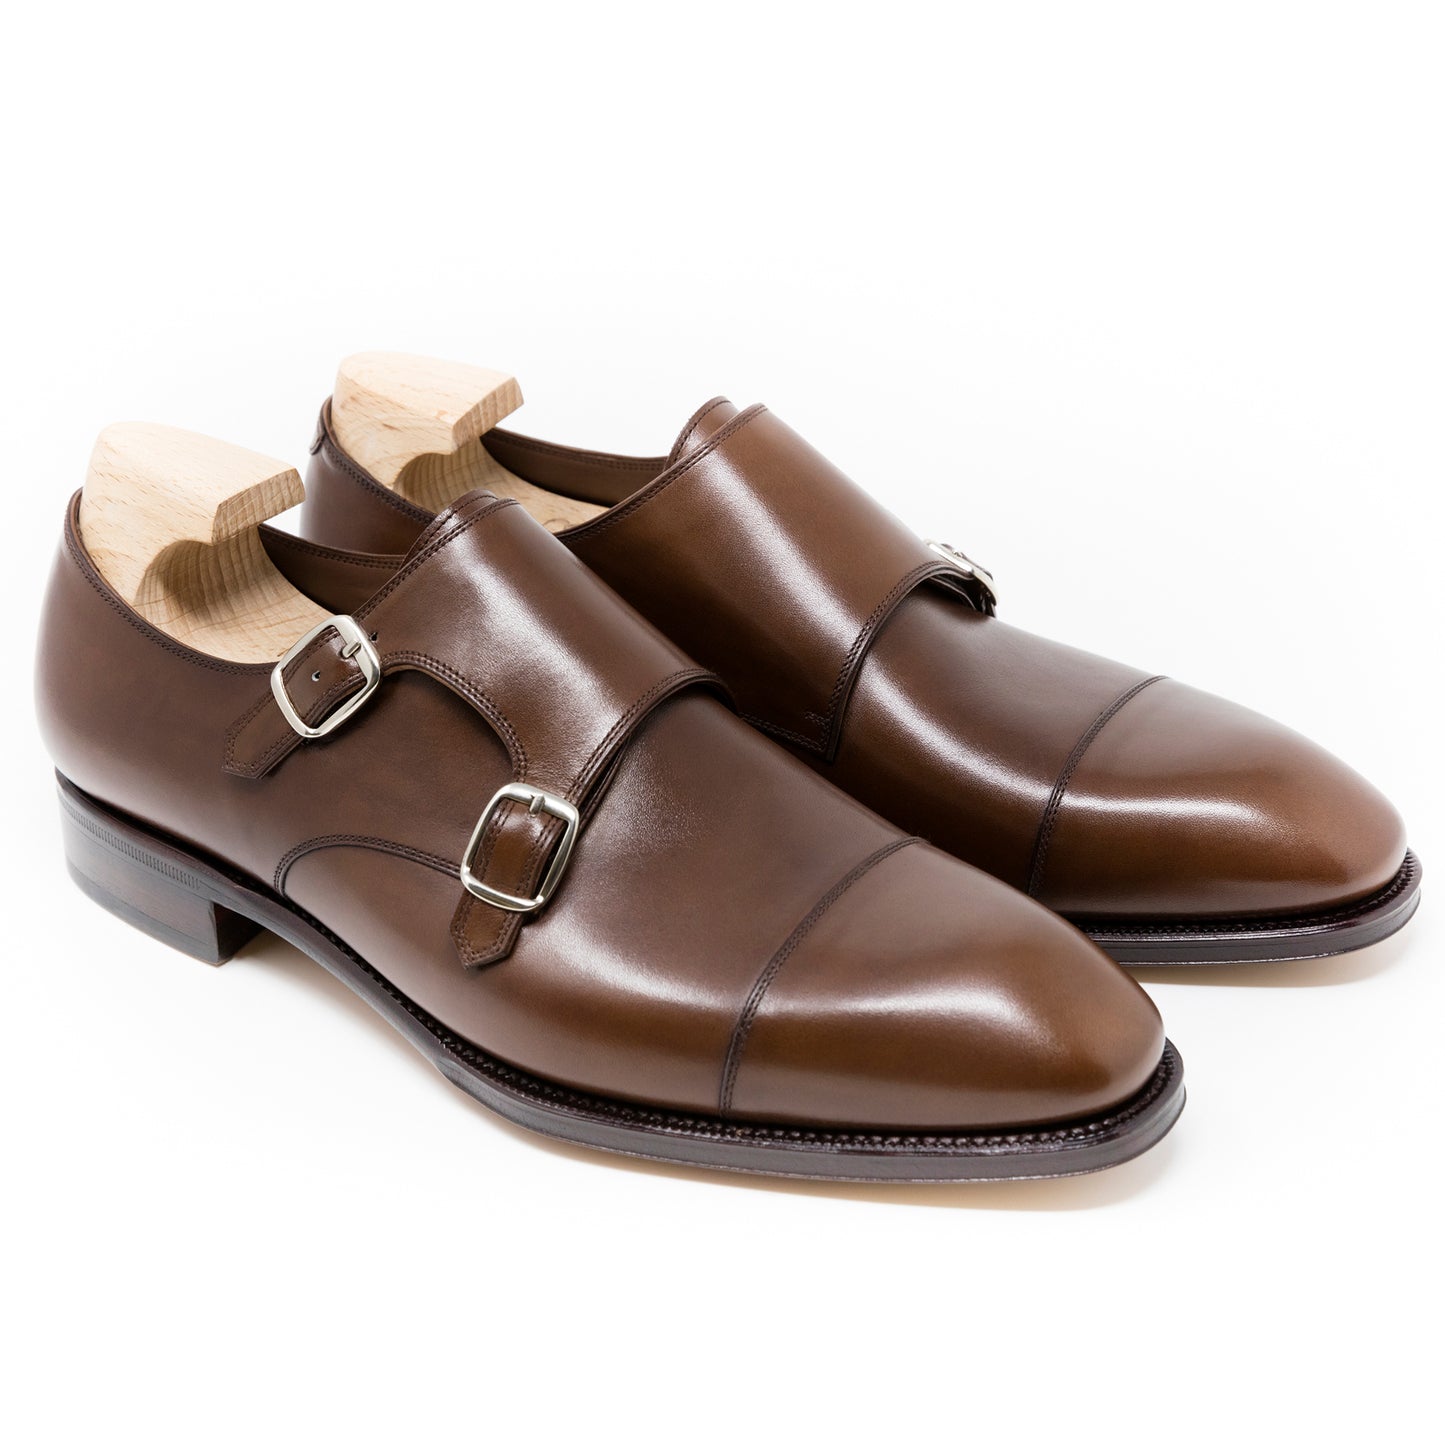 TLB Mallorca leather shoes 506 / ALAN / VEGANO BROWN